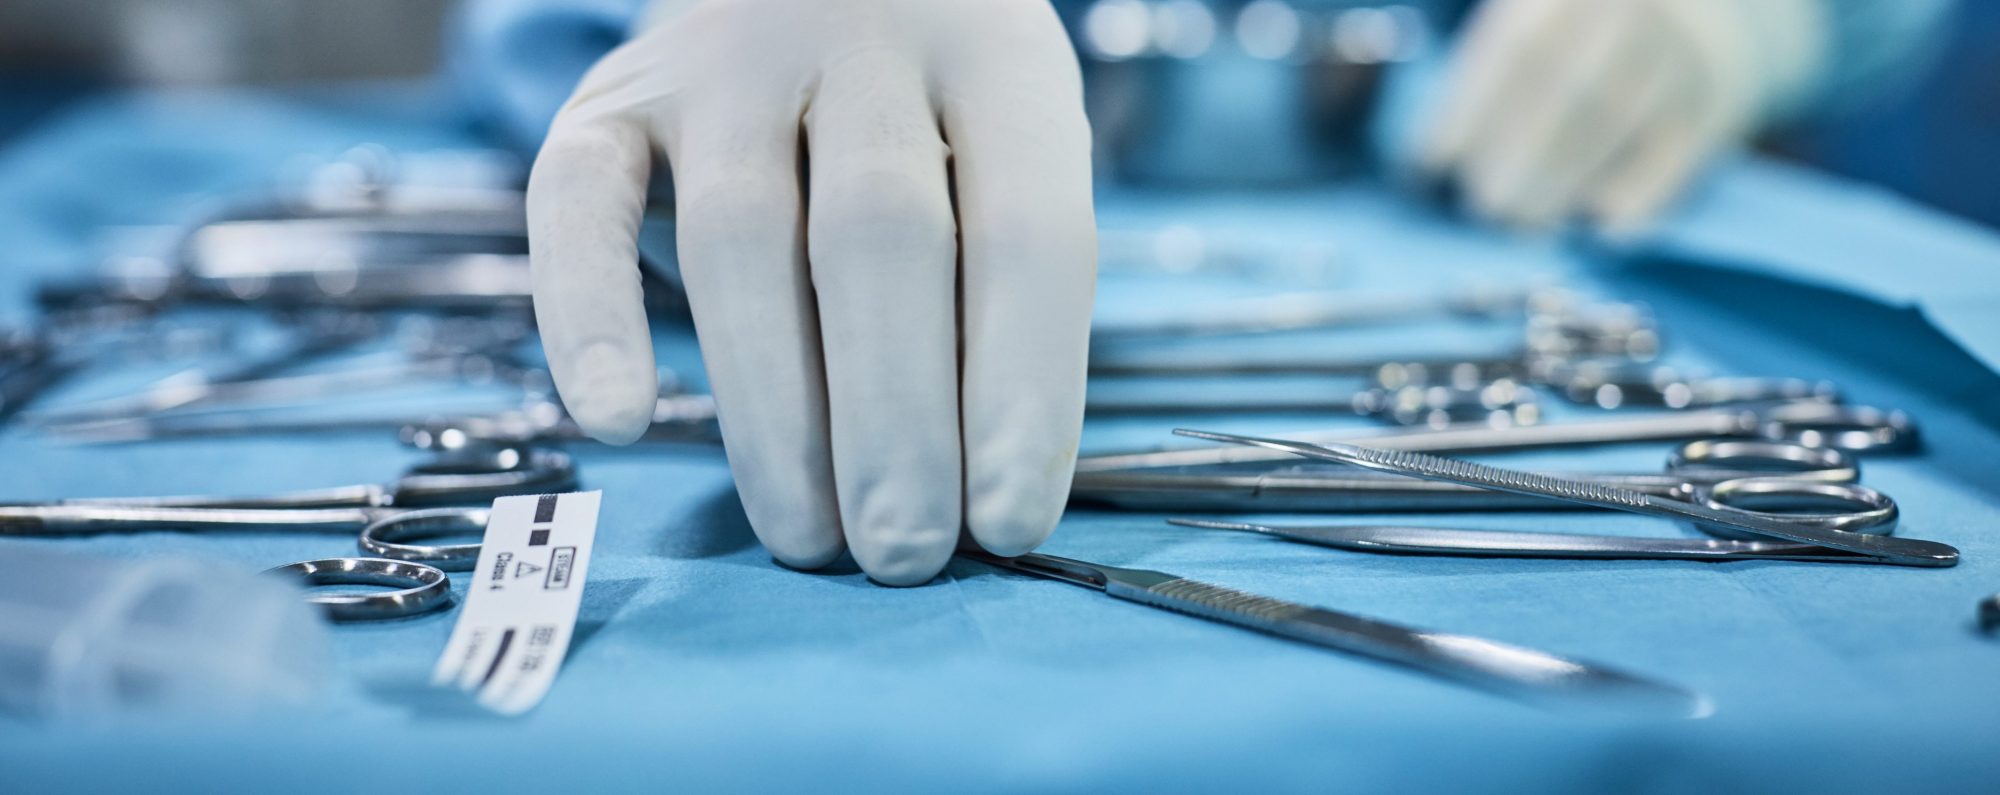 Closeup of surgeon's hand picking up surgical tools from tray.